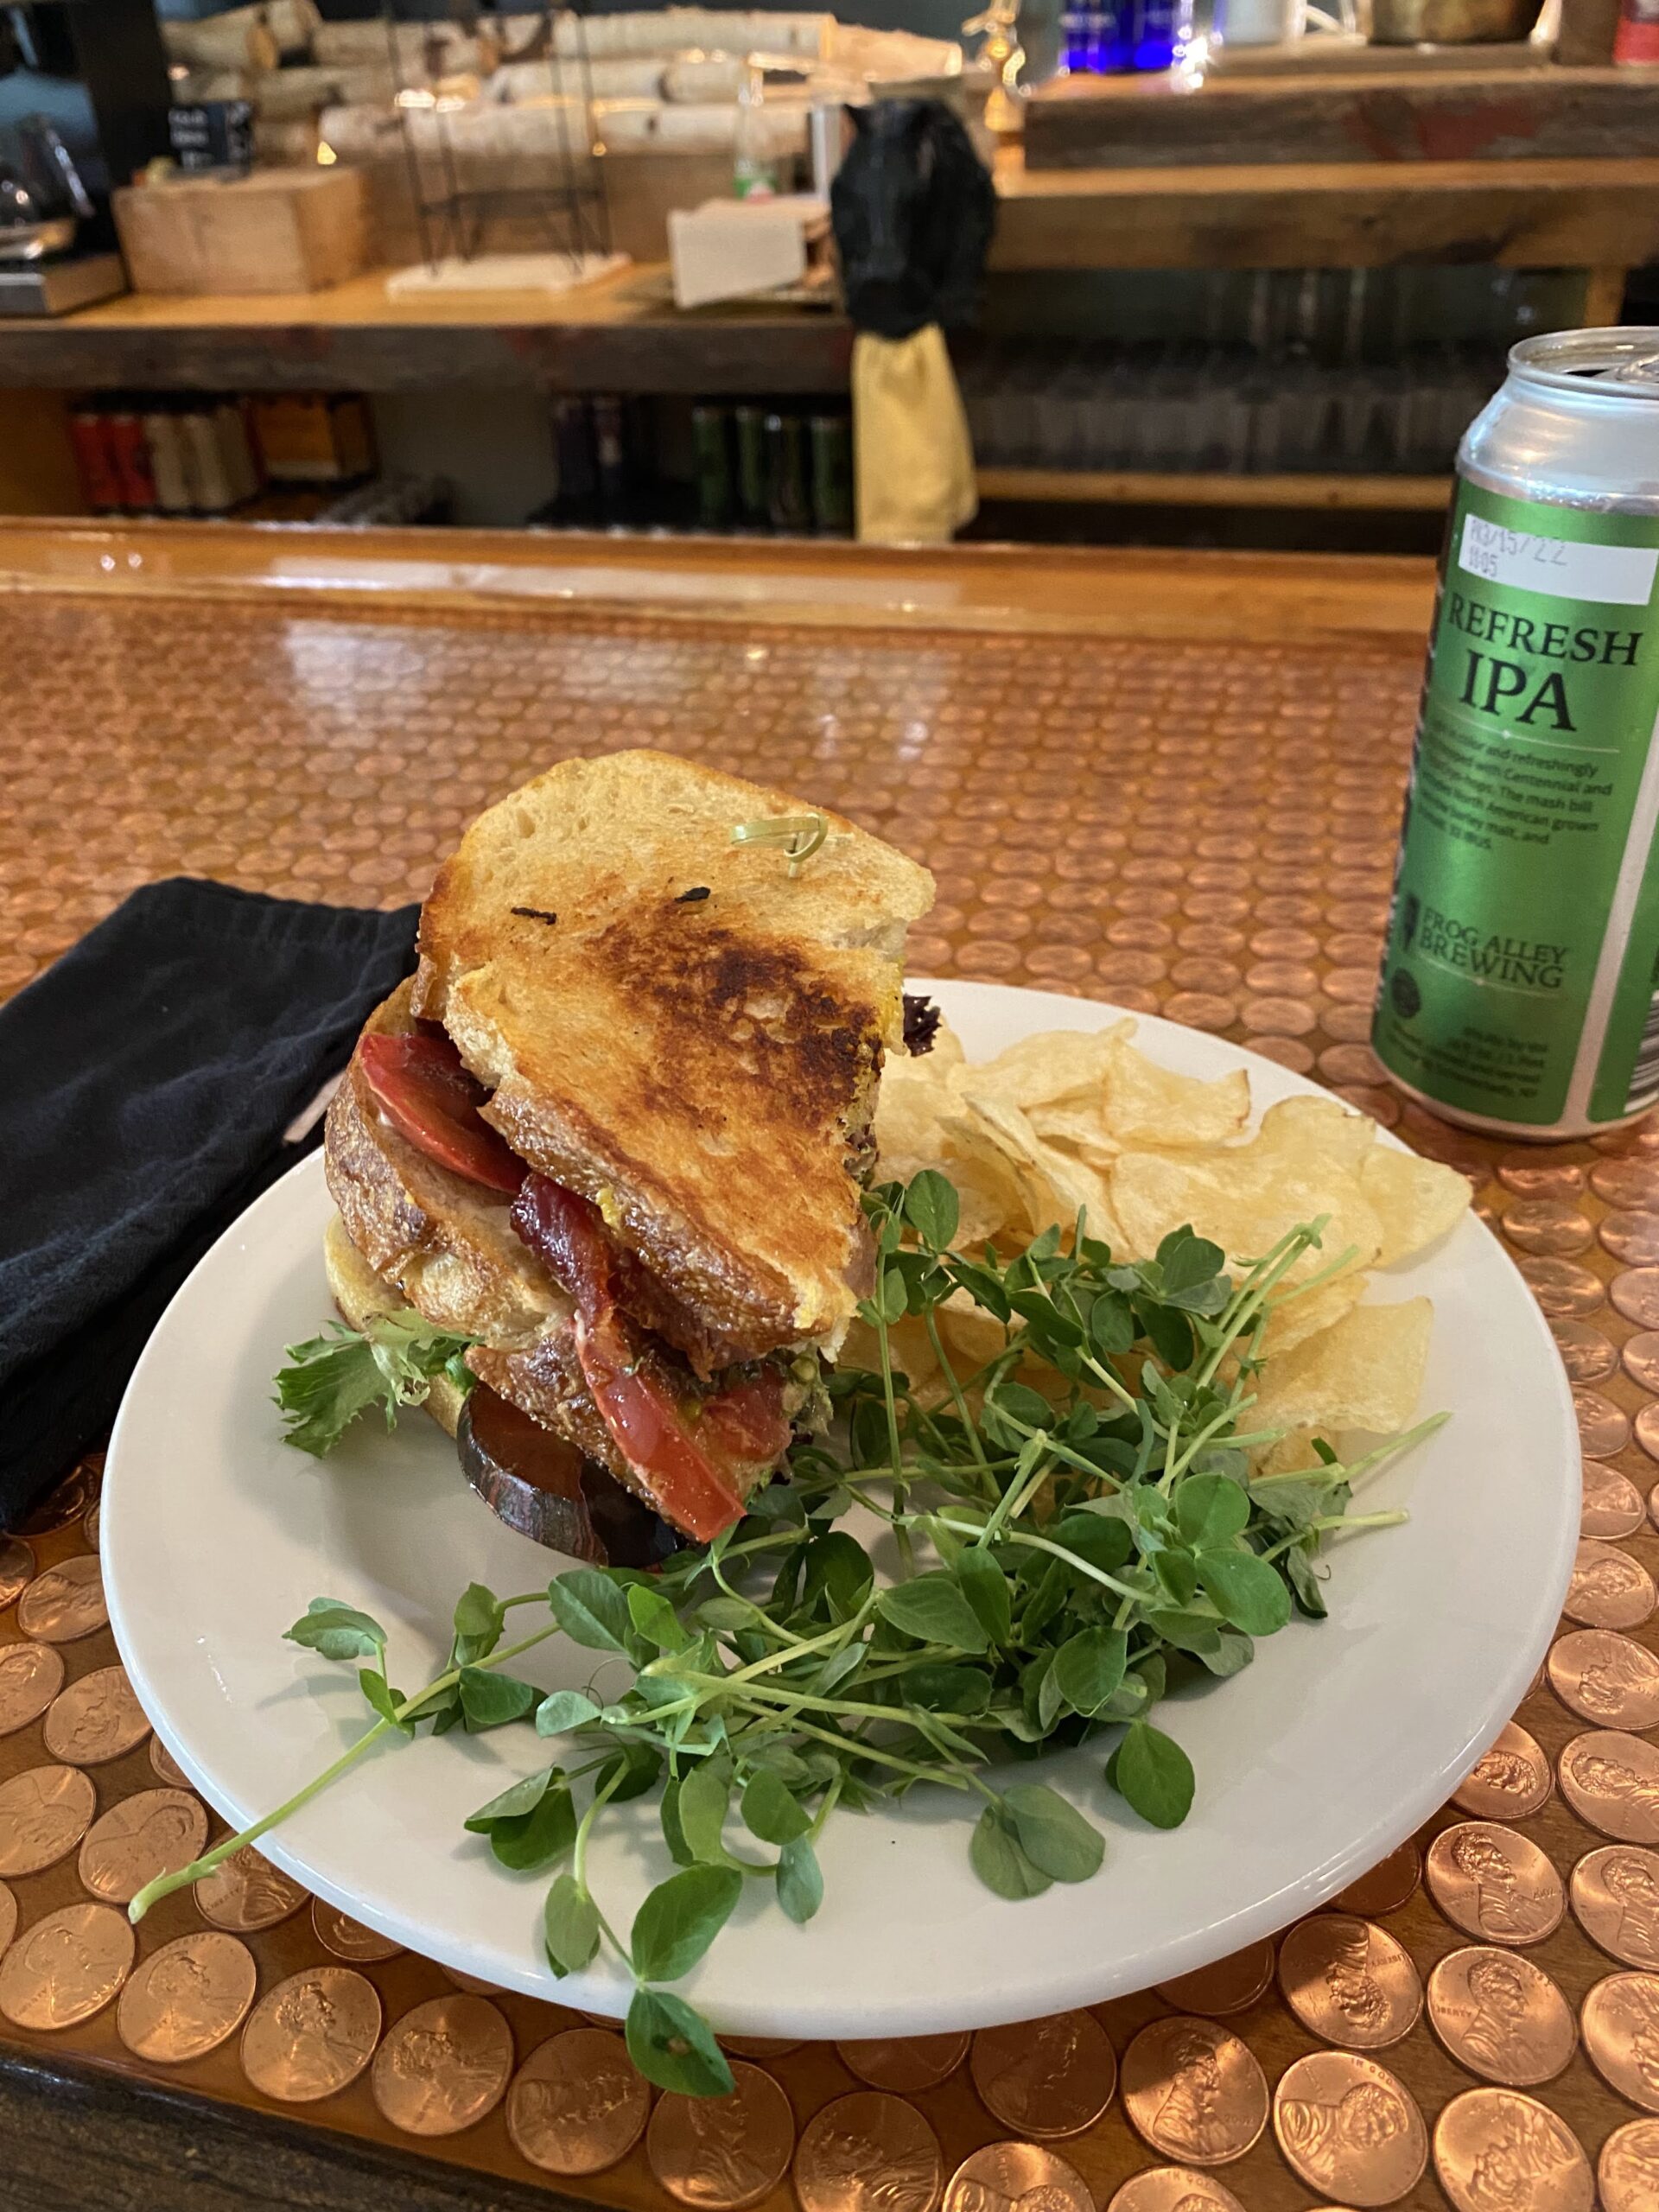 A sandwich with a side of salad, potato chips, and a can of beer